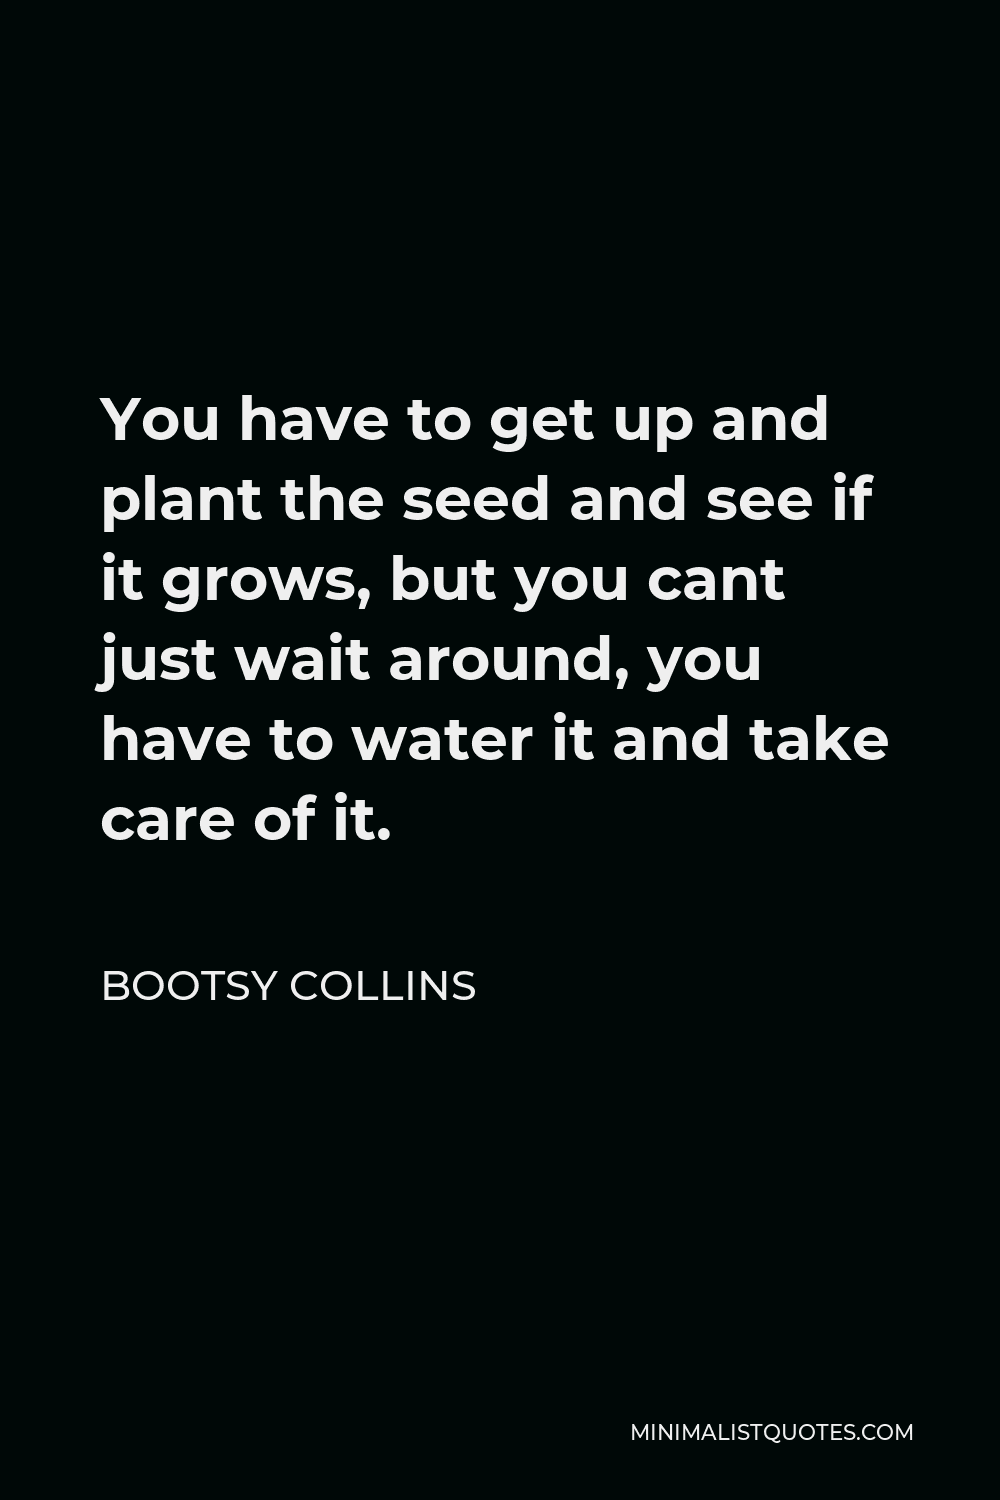 Bootsy Collins Quote - You have to get up and plant the seed and see if it grows, but you cant just wait around, you have to water it and take care of it.